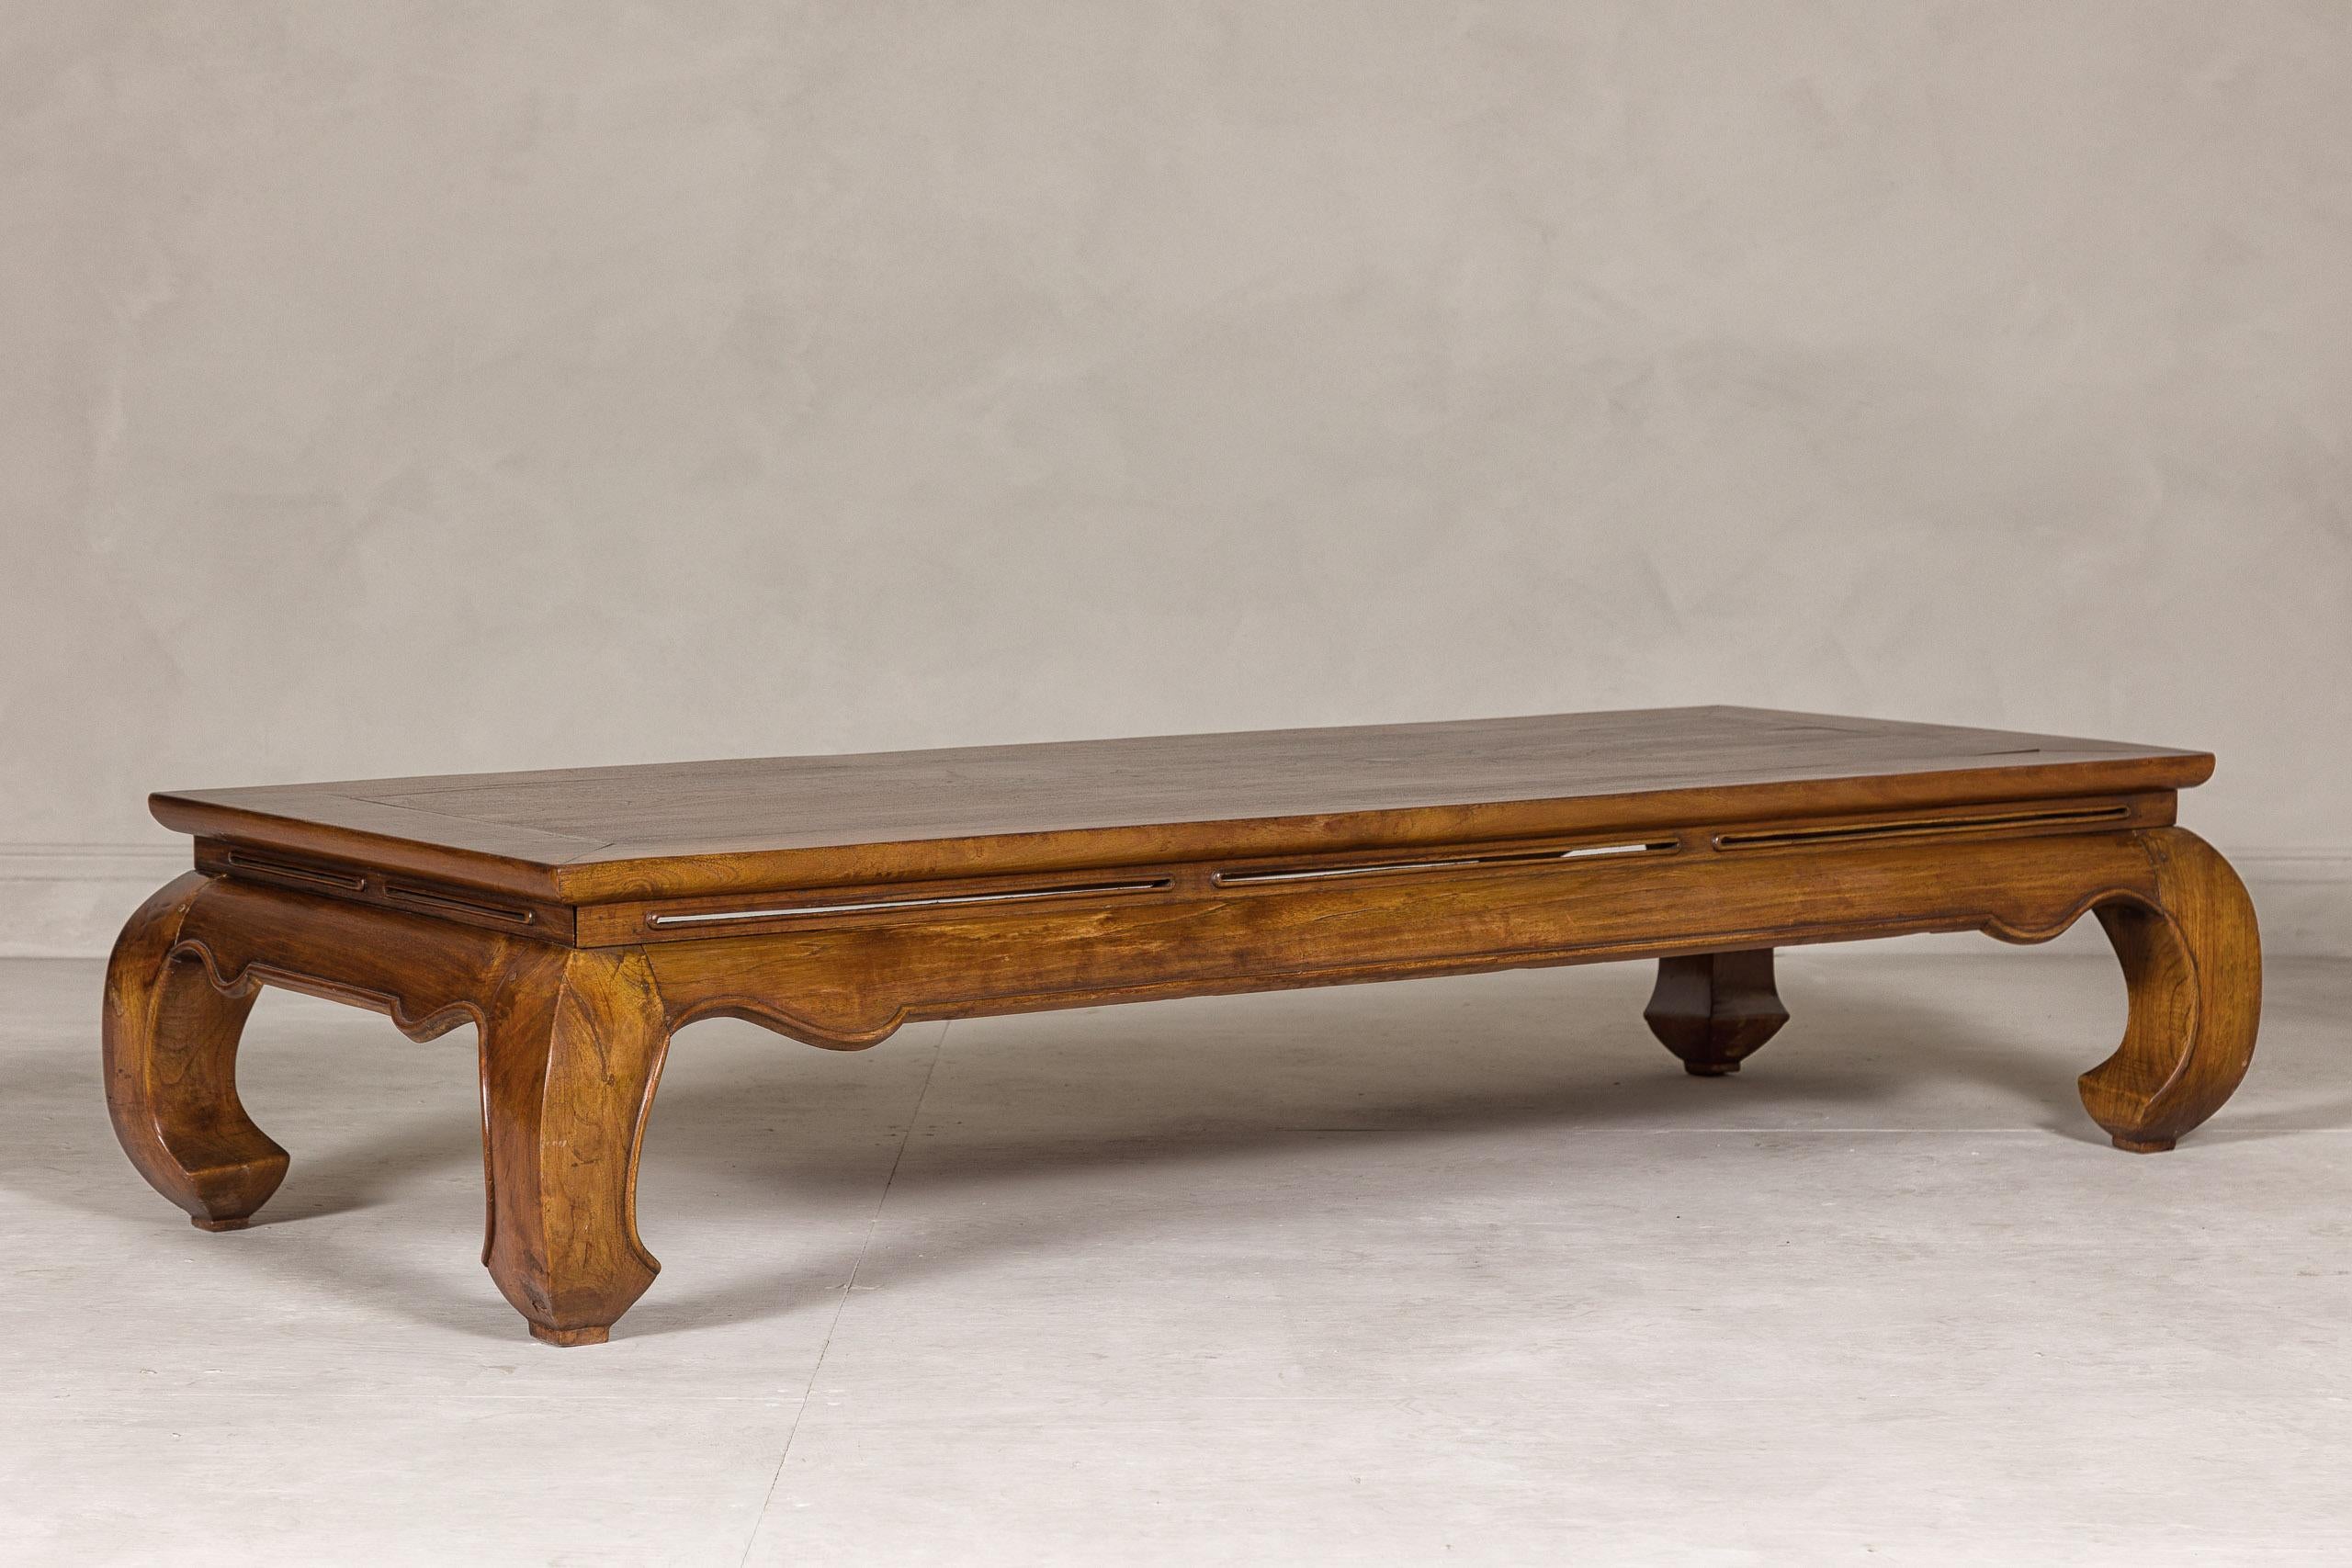 Antique Long Chow Legs Coffee Table with Waisted Pierced Apron In Good Condition For Sale In Yonkers, NY